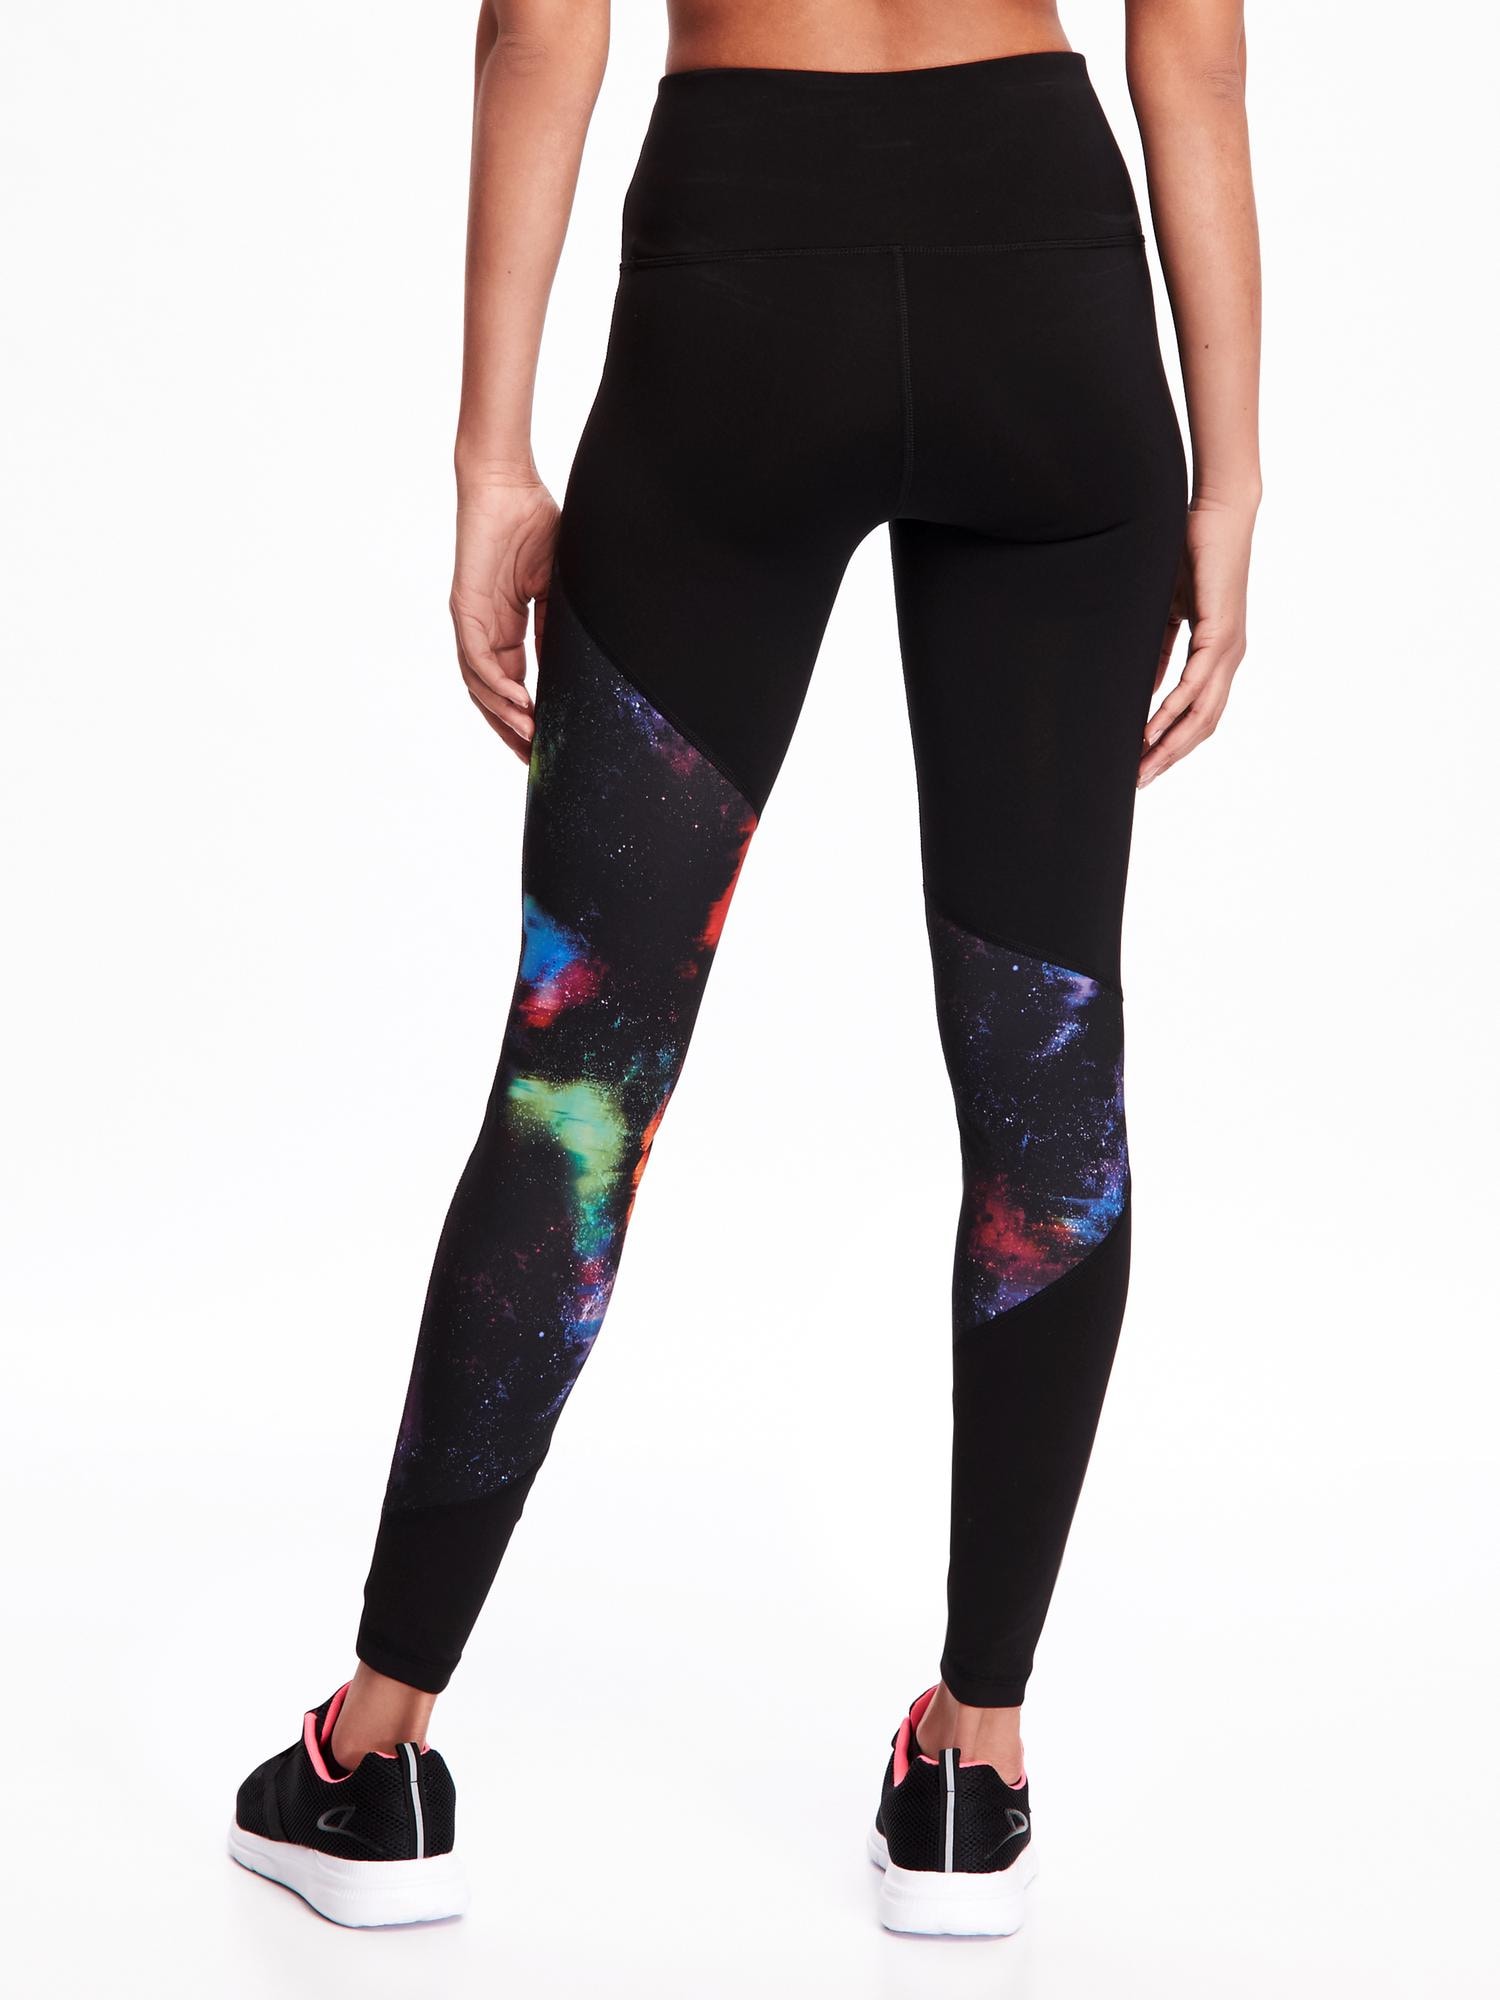 Go-Dry High-Rise Compression Leggings for Women